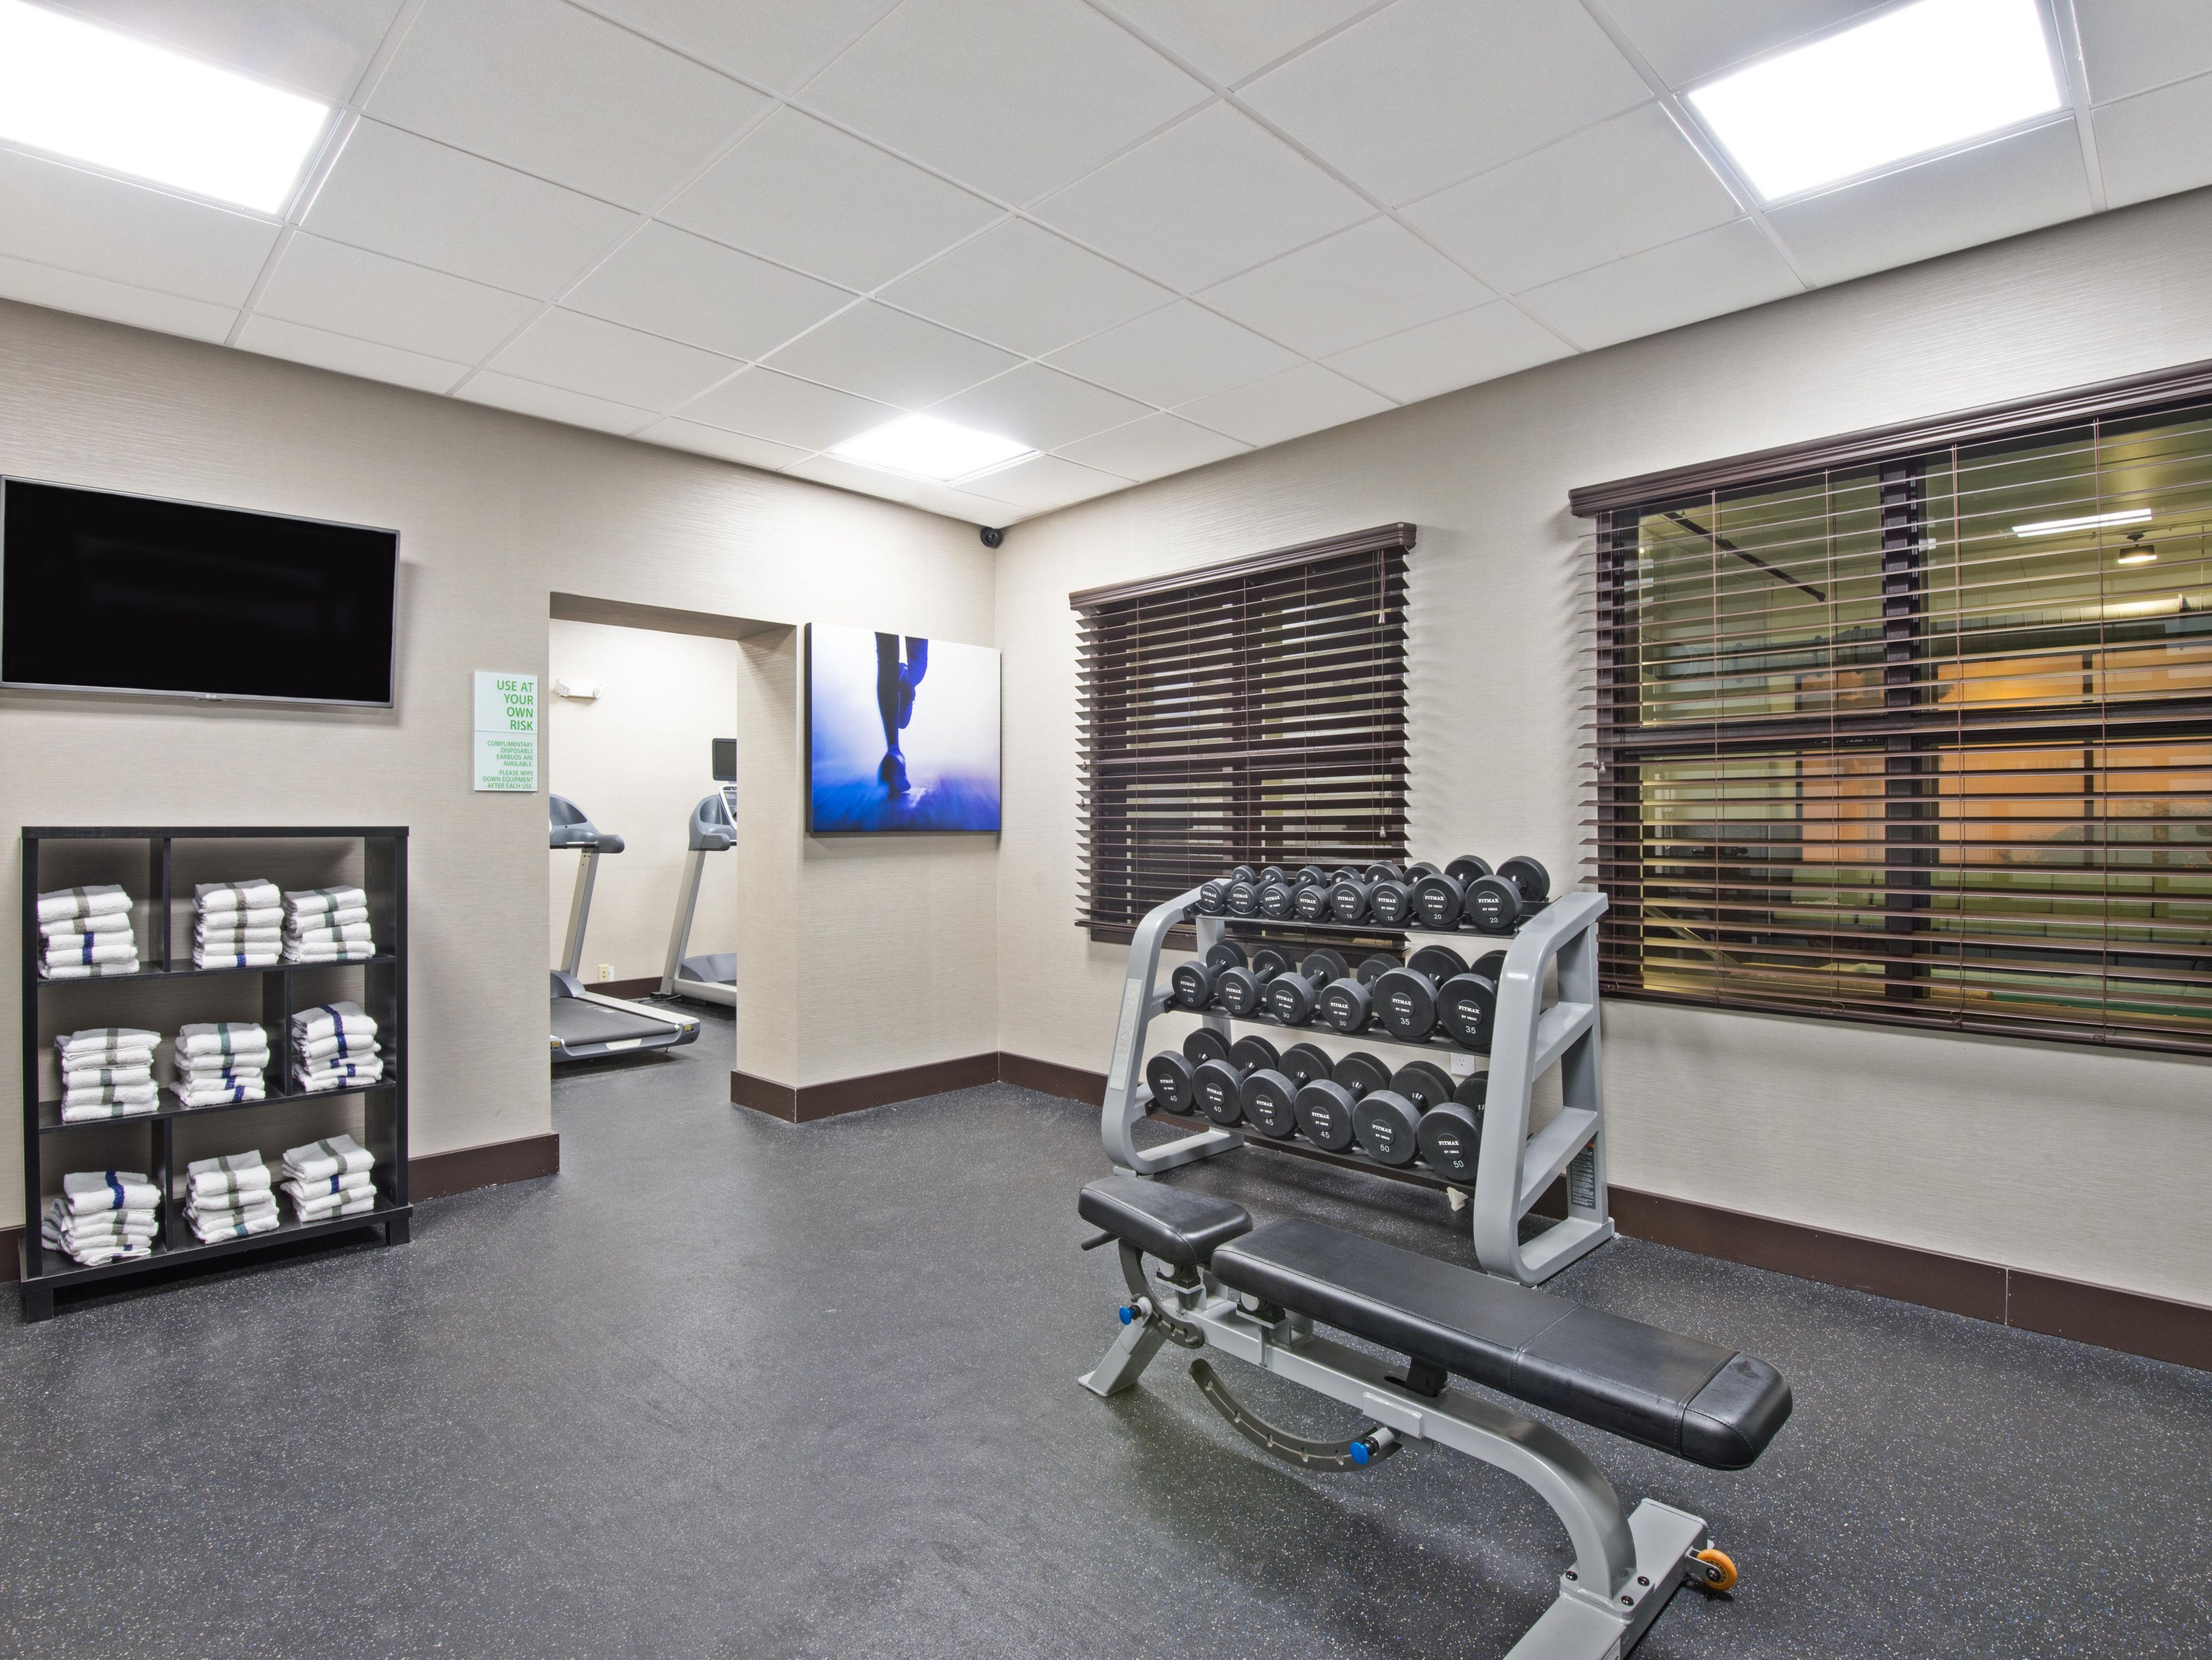 Get your sweat on in our complimentary, fully equipped Fitness Center- open 24 hours.